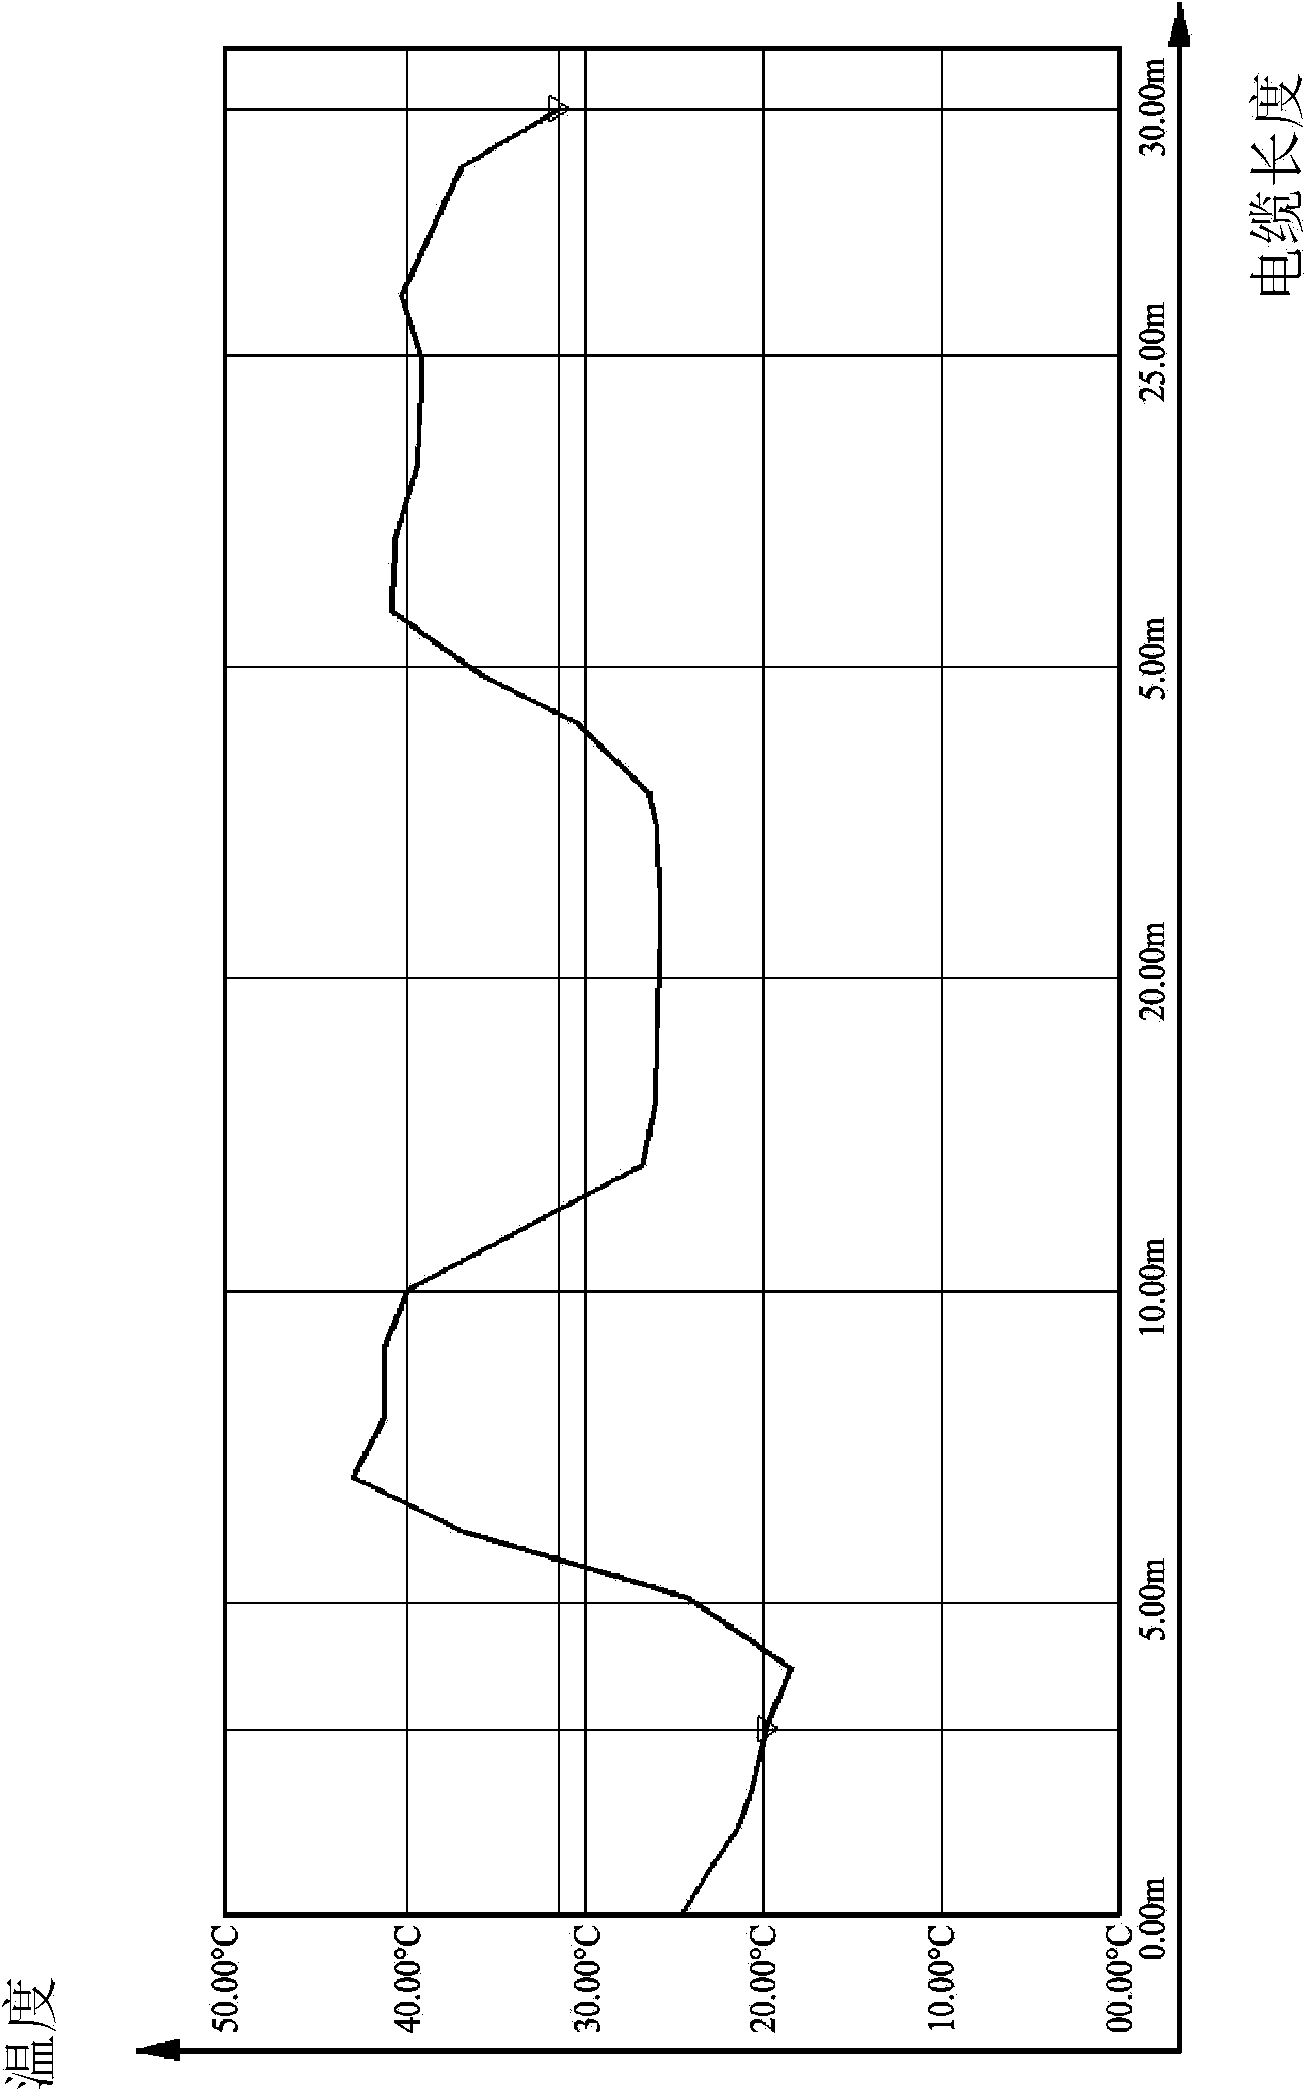 Intelligent heating cable having a smart function and method for manufacturing same